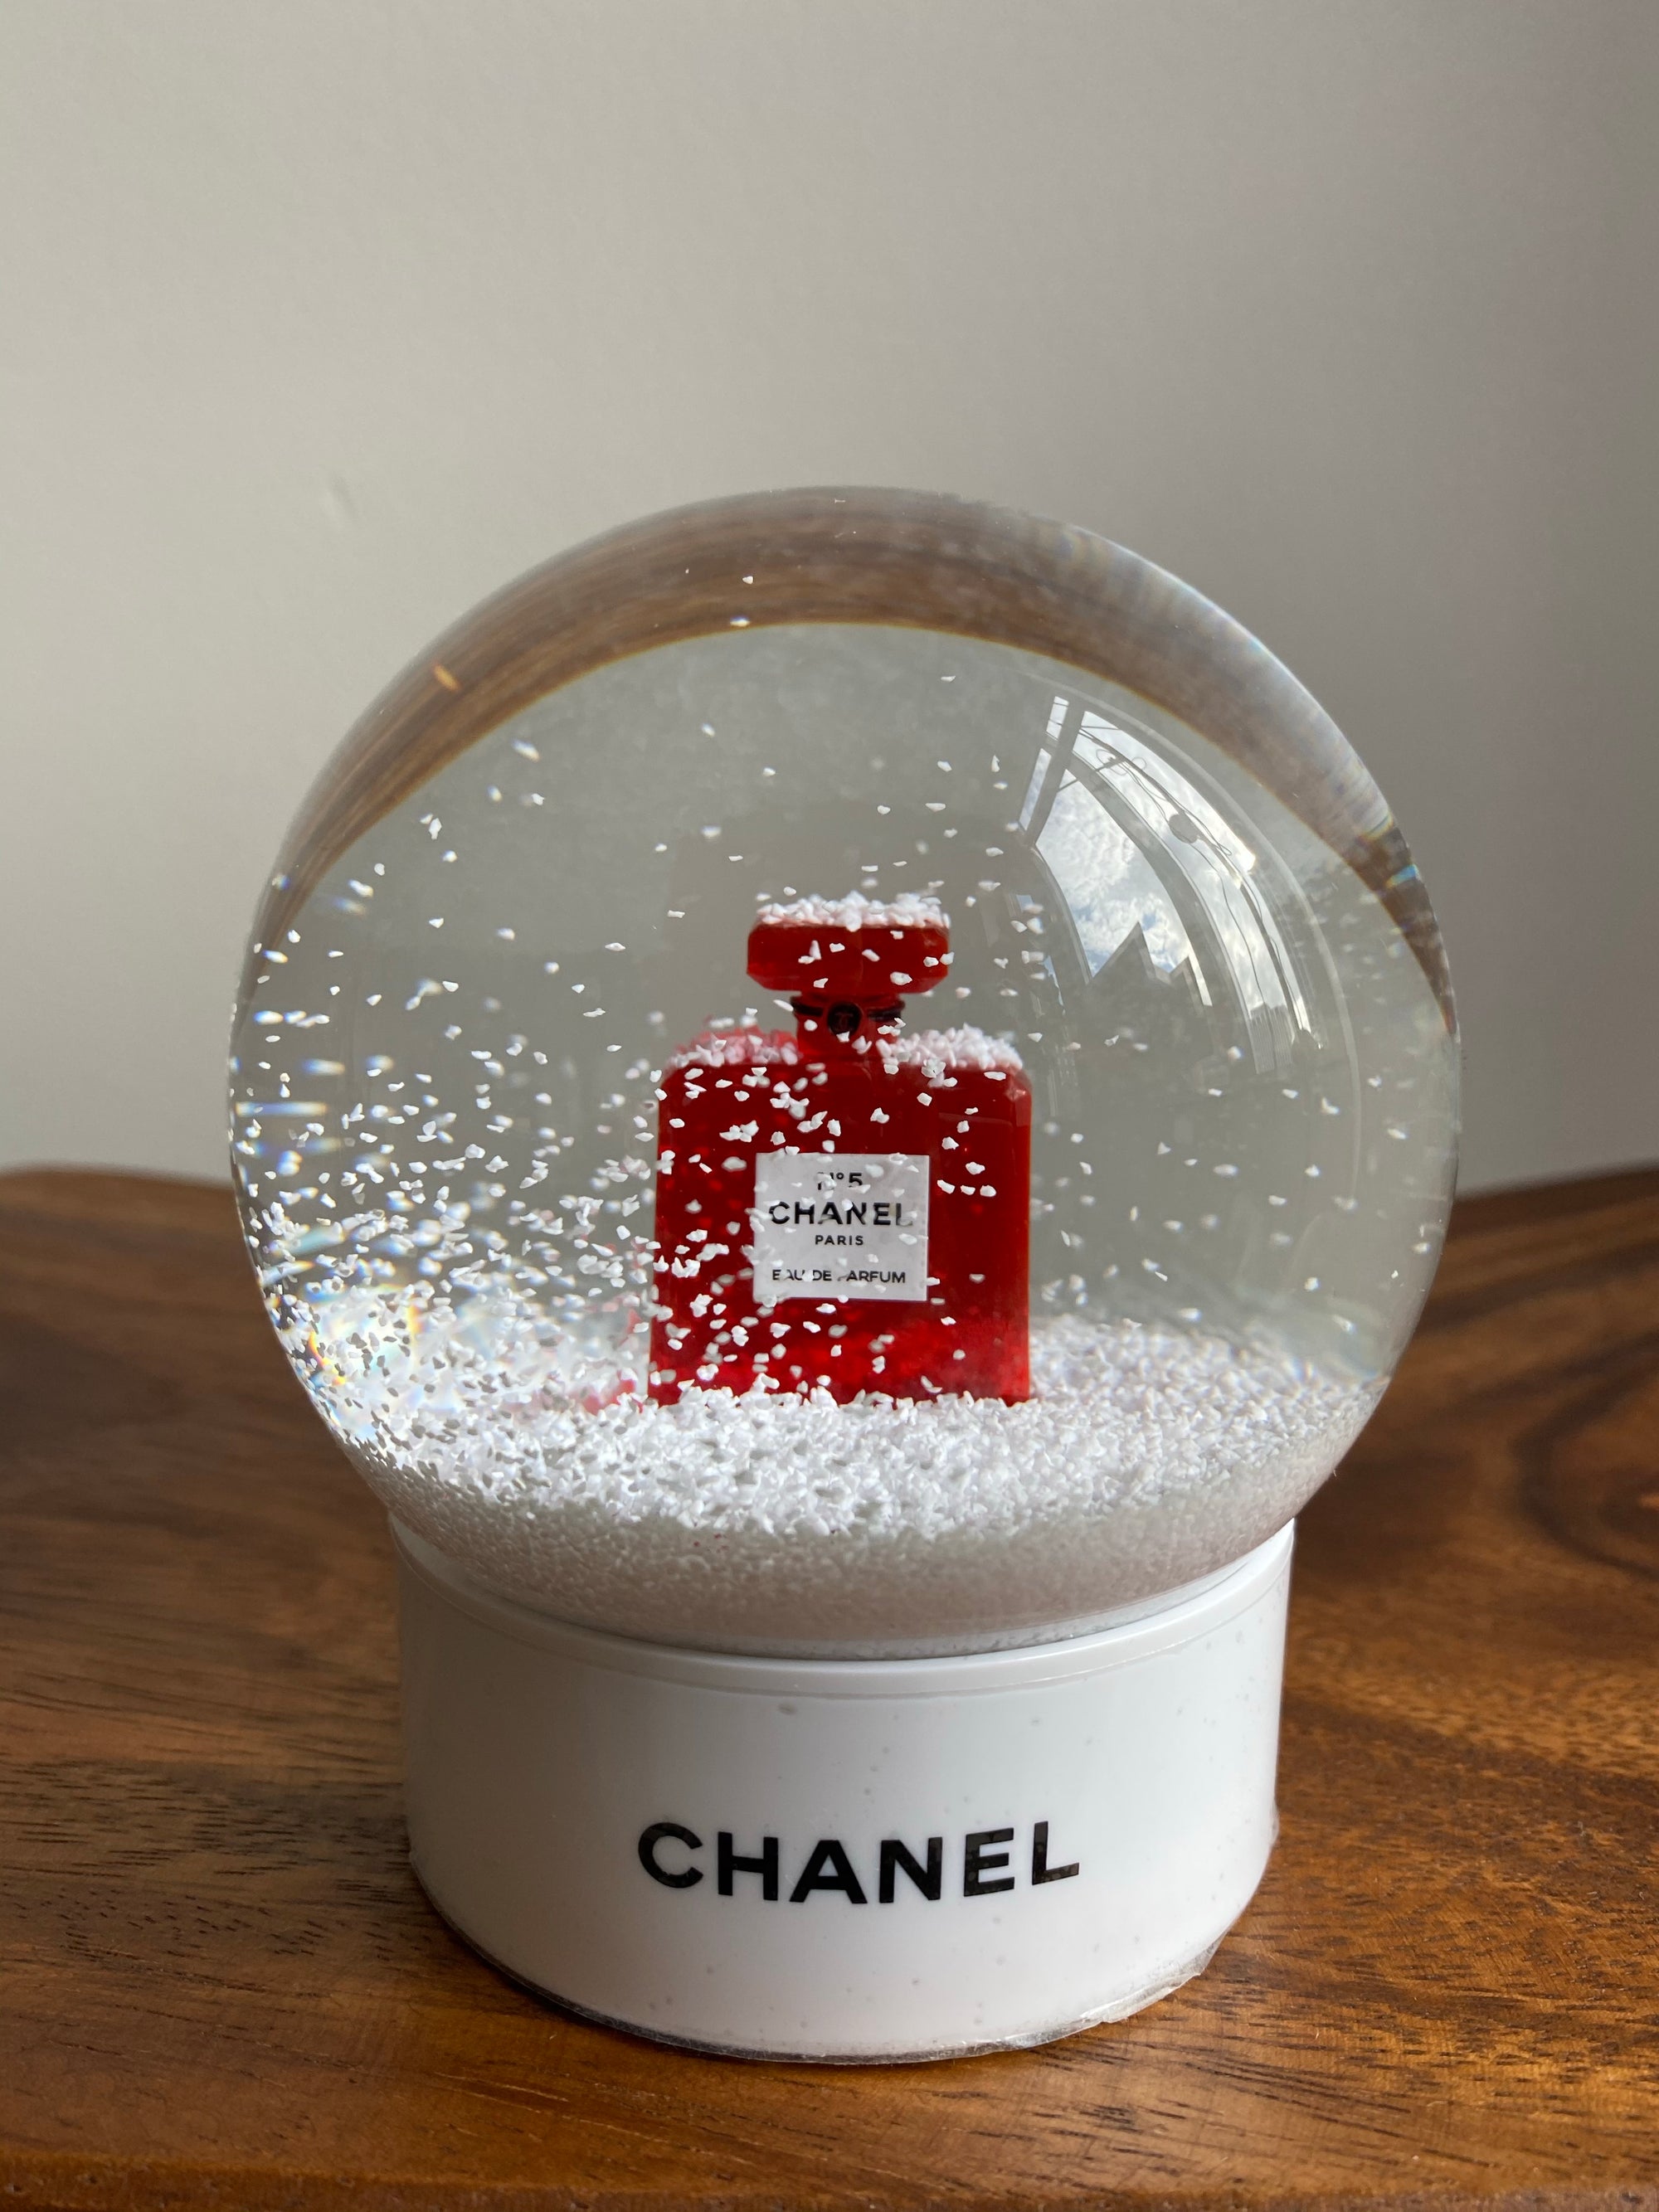 CHANEL - Snow globe with the bottle number 5 in red - Bo…